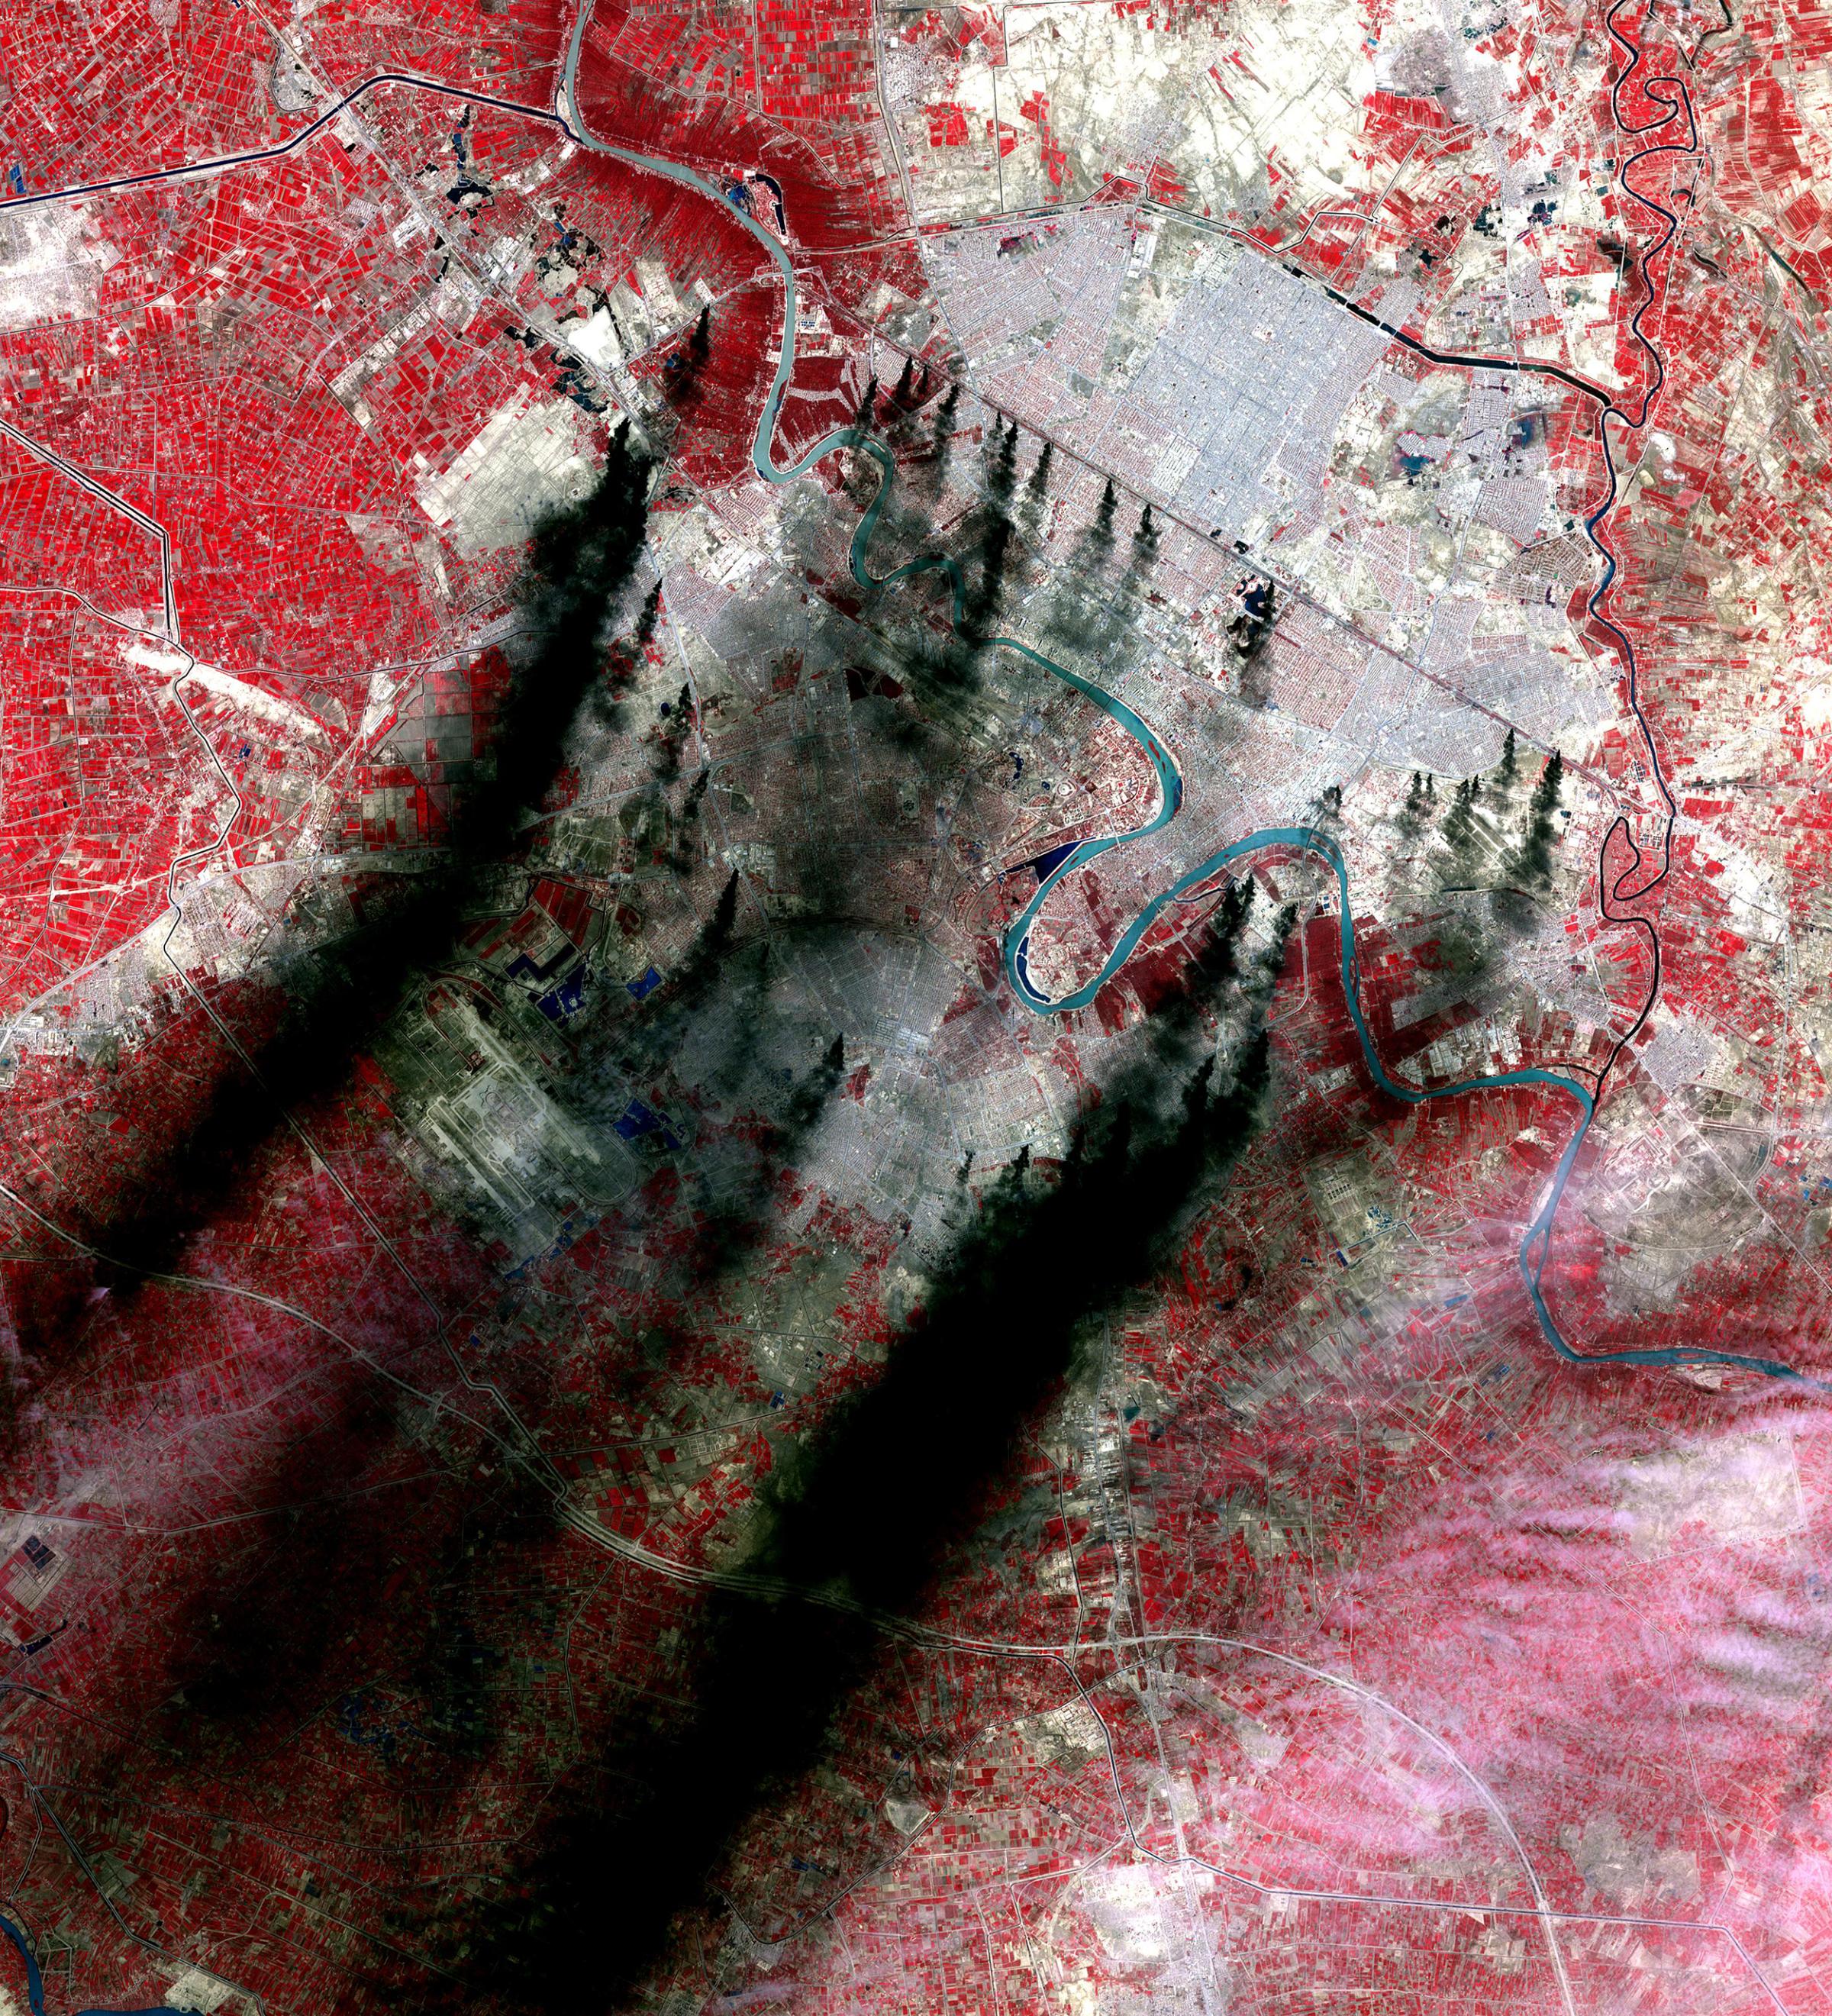 Plumes, believed to be from burning pools of oil from pipelines outside of Baghdad, Iraq, create an environmental health hazard for residents of the city and surrounding regions. The near-infrared wavelengths captured here show vegetation as red. The image was acquired on March 31, 2003.